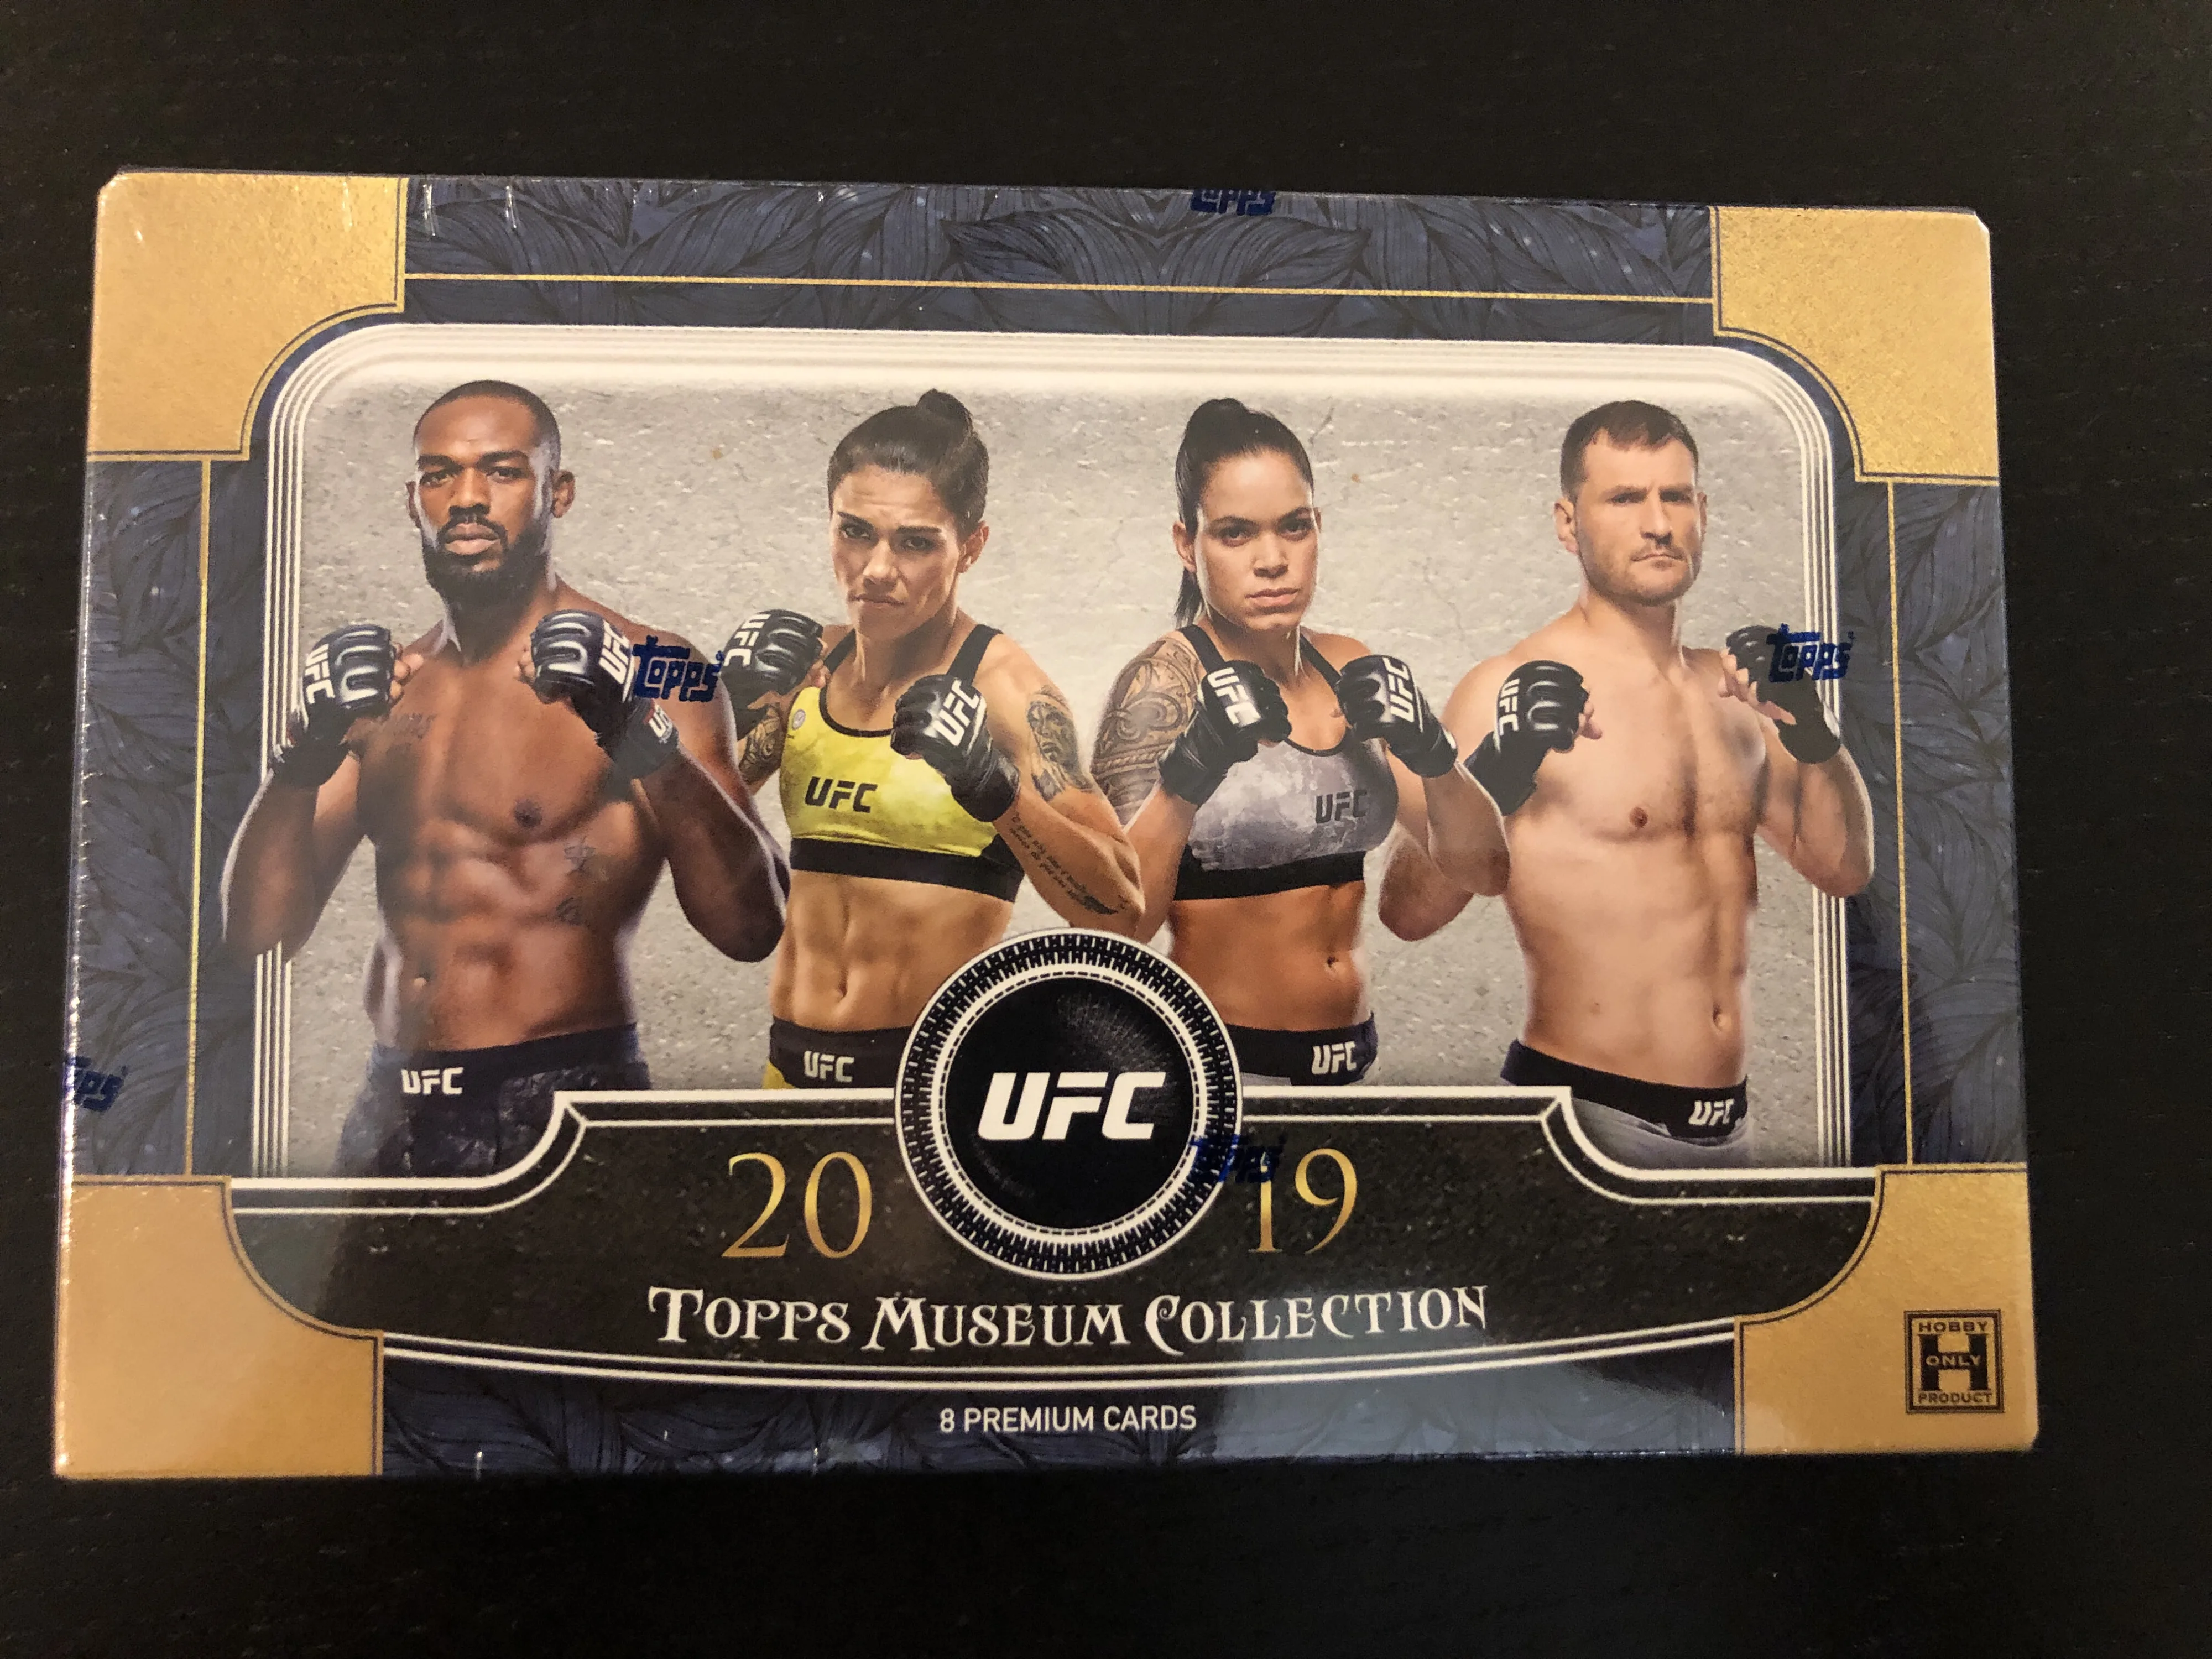 Inside the Pack: 2019 Topps UFC Museum Collection - Big League 